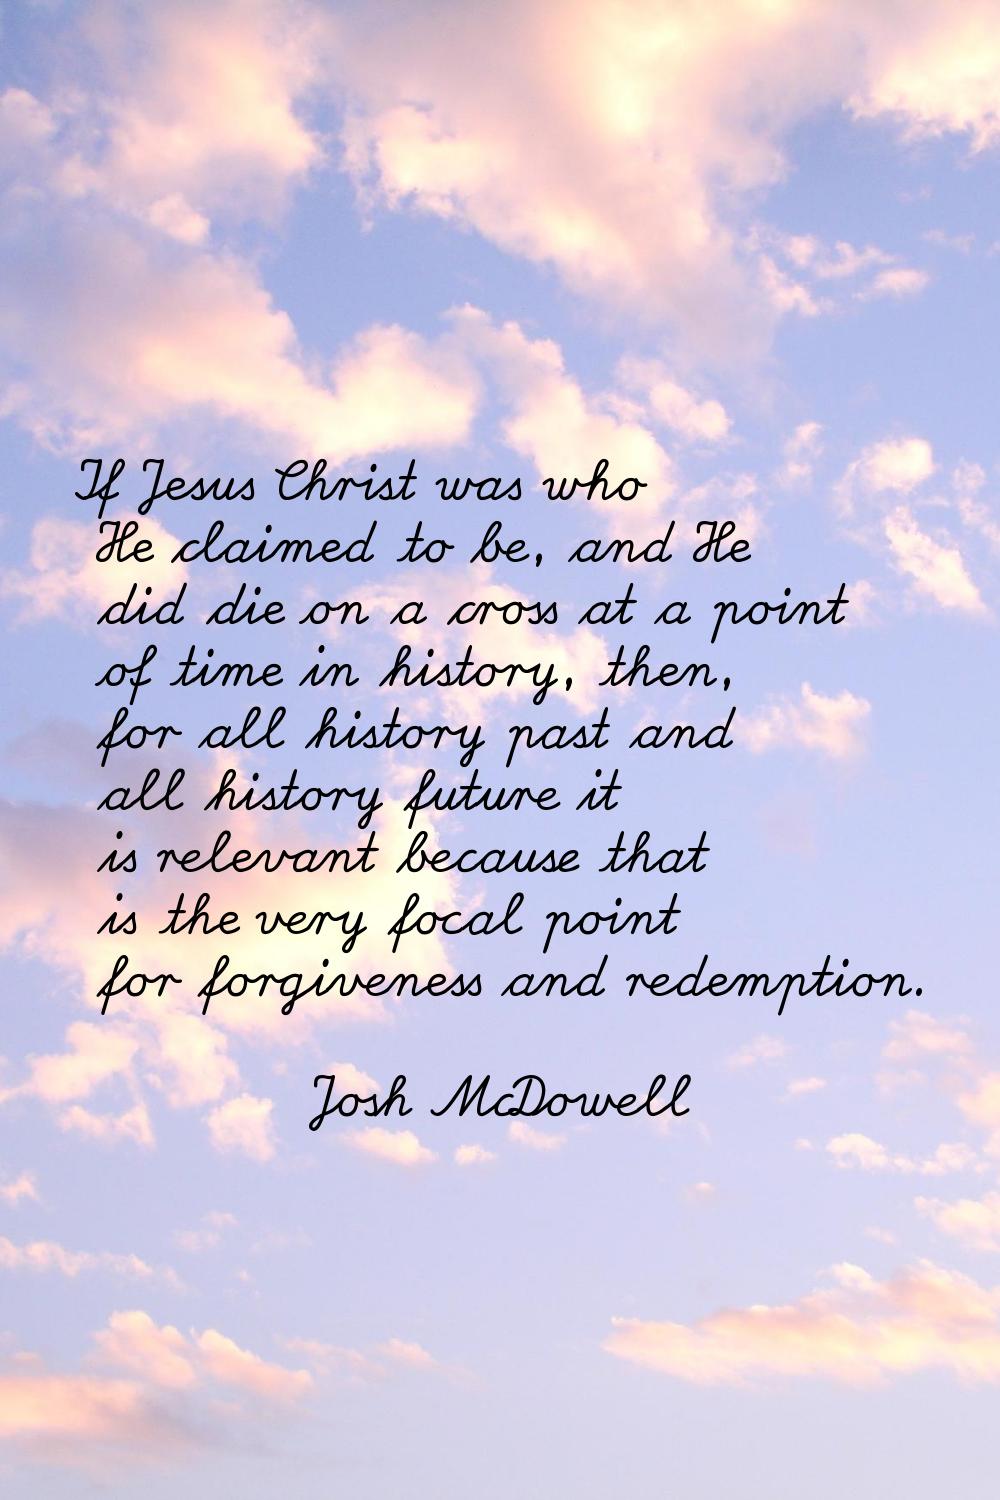 If Jesus Christ was who He claimed to be, and He did die on a cross at a point of time in history, 